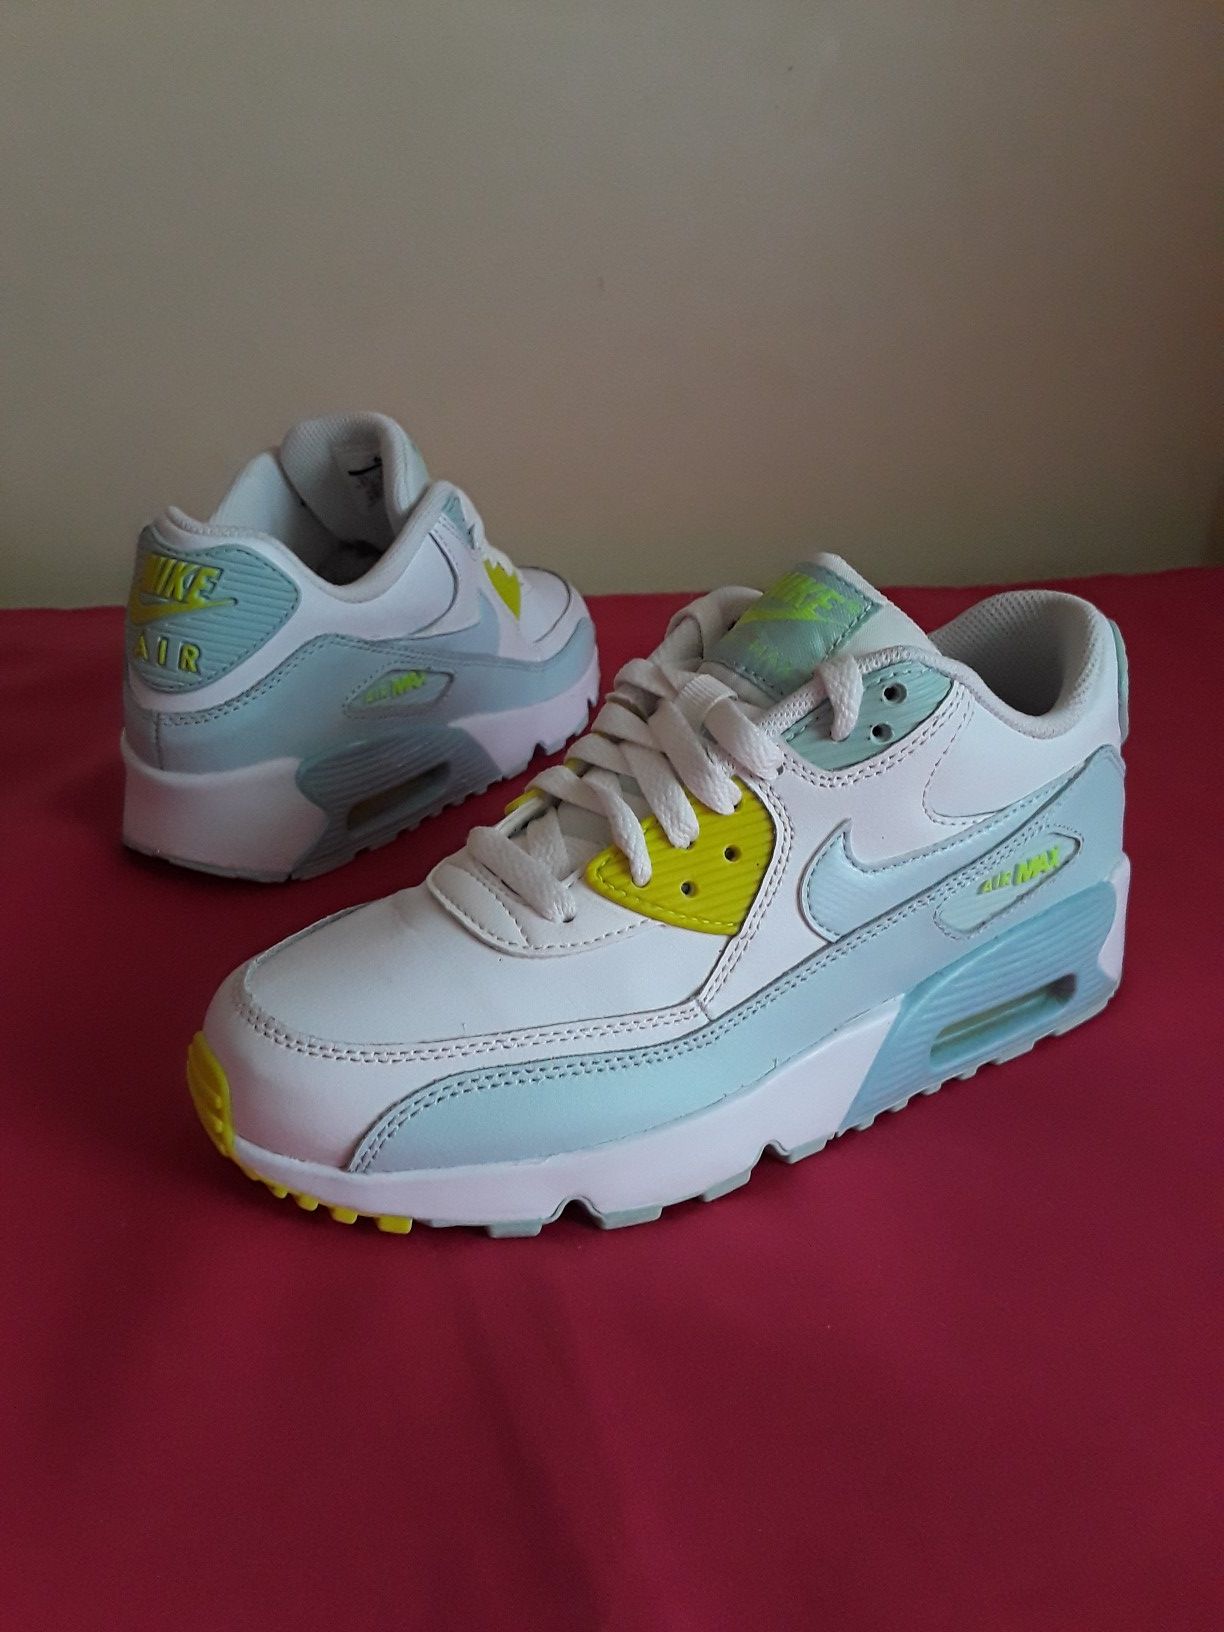 Nike Air Max 90 Essential Size 7.5 WOMEN & Size 6Y or 6 MEN